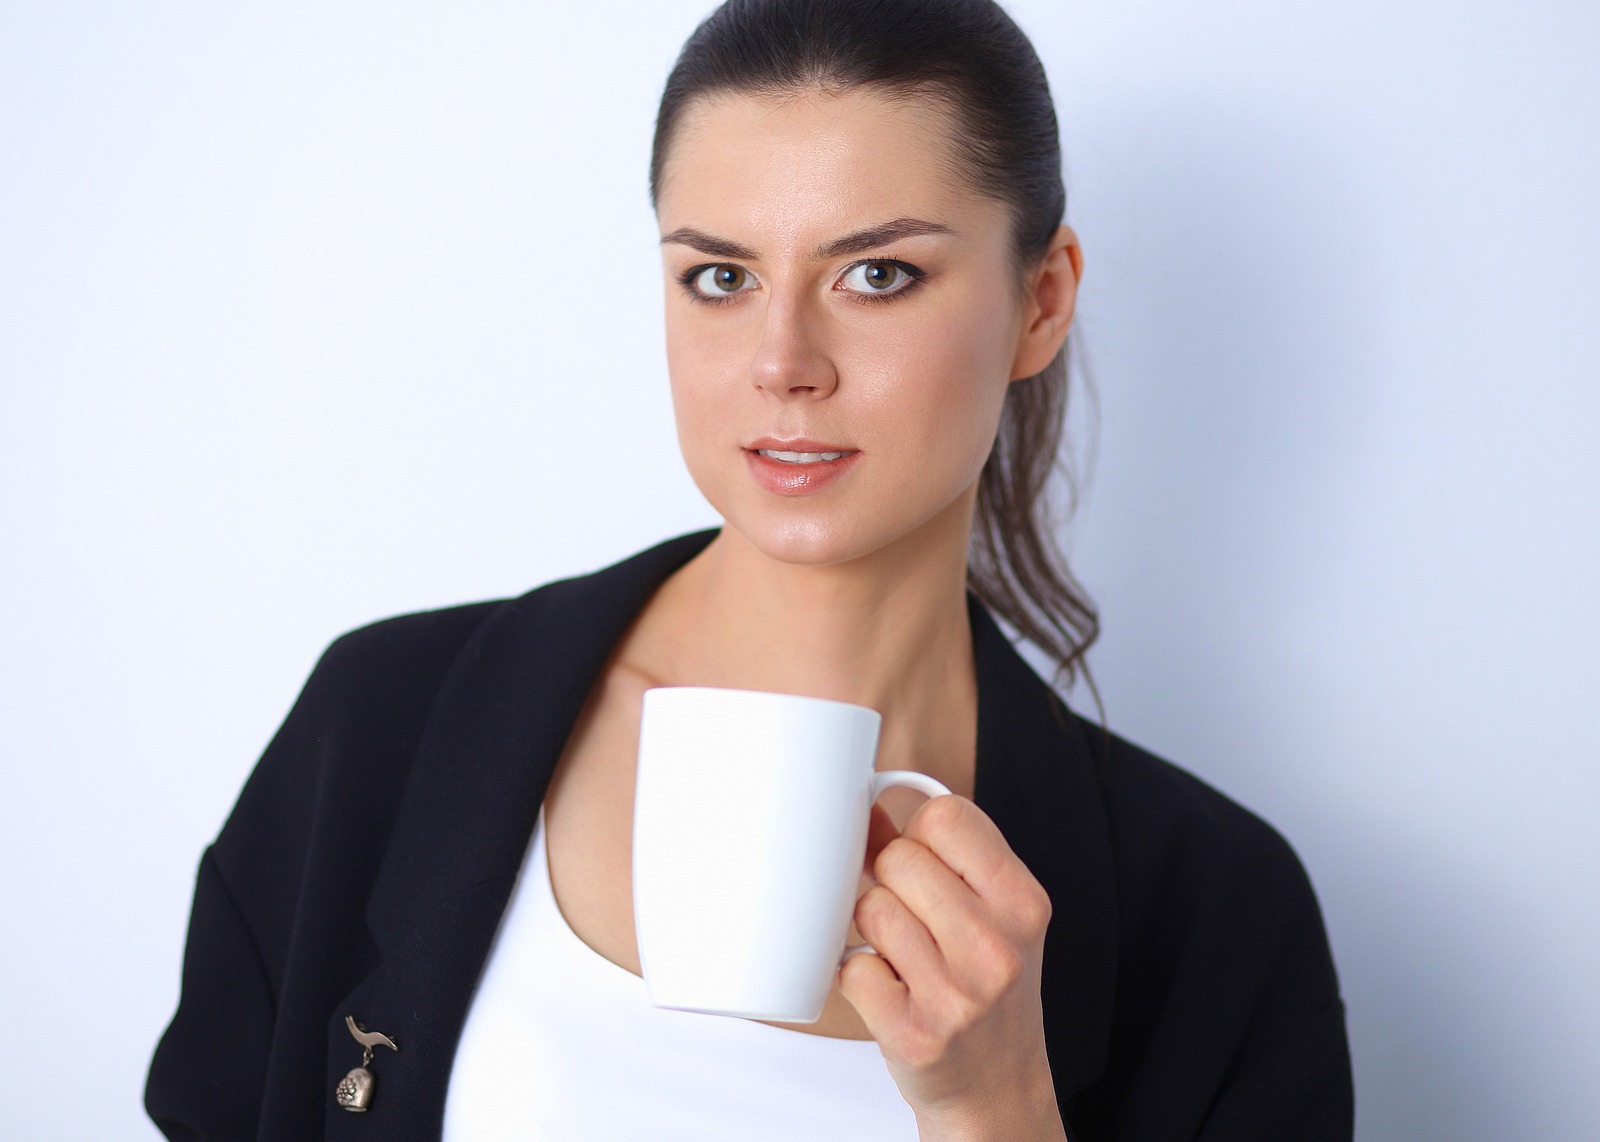 coffee drinker worries about stained teeth